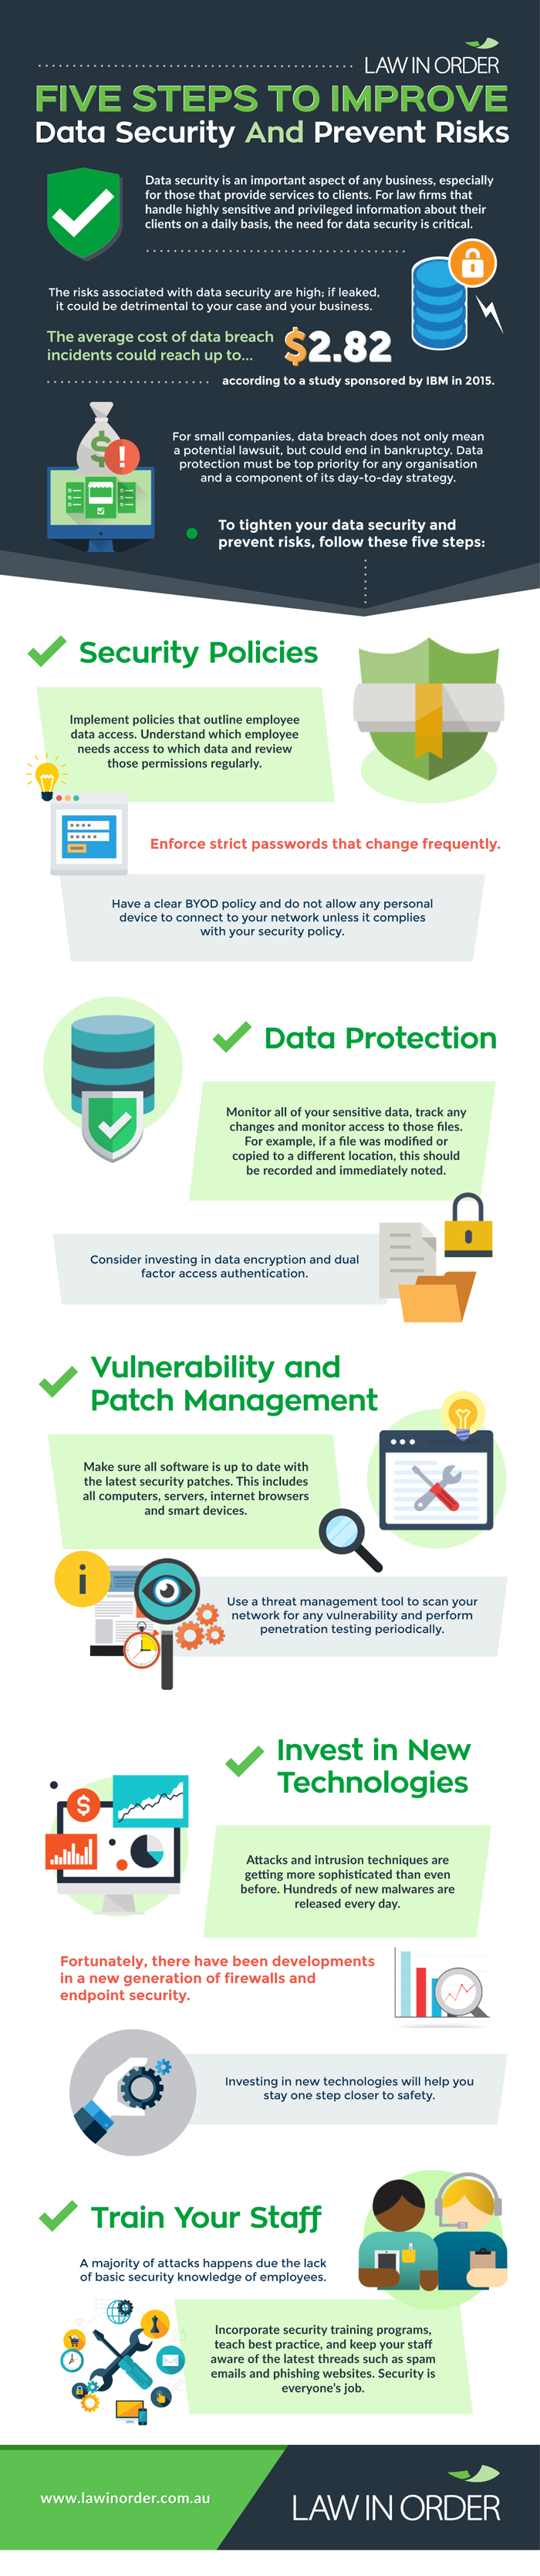 Five-Steps-To-Improve-Data-Security-And-Prevent-Risks